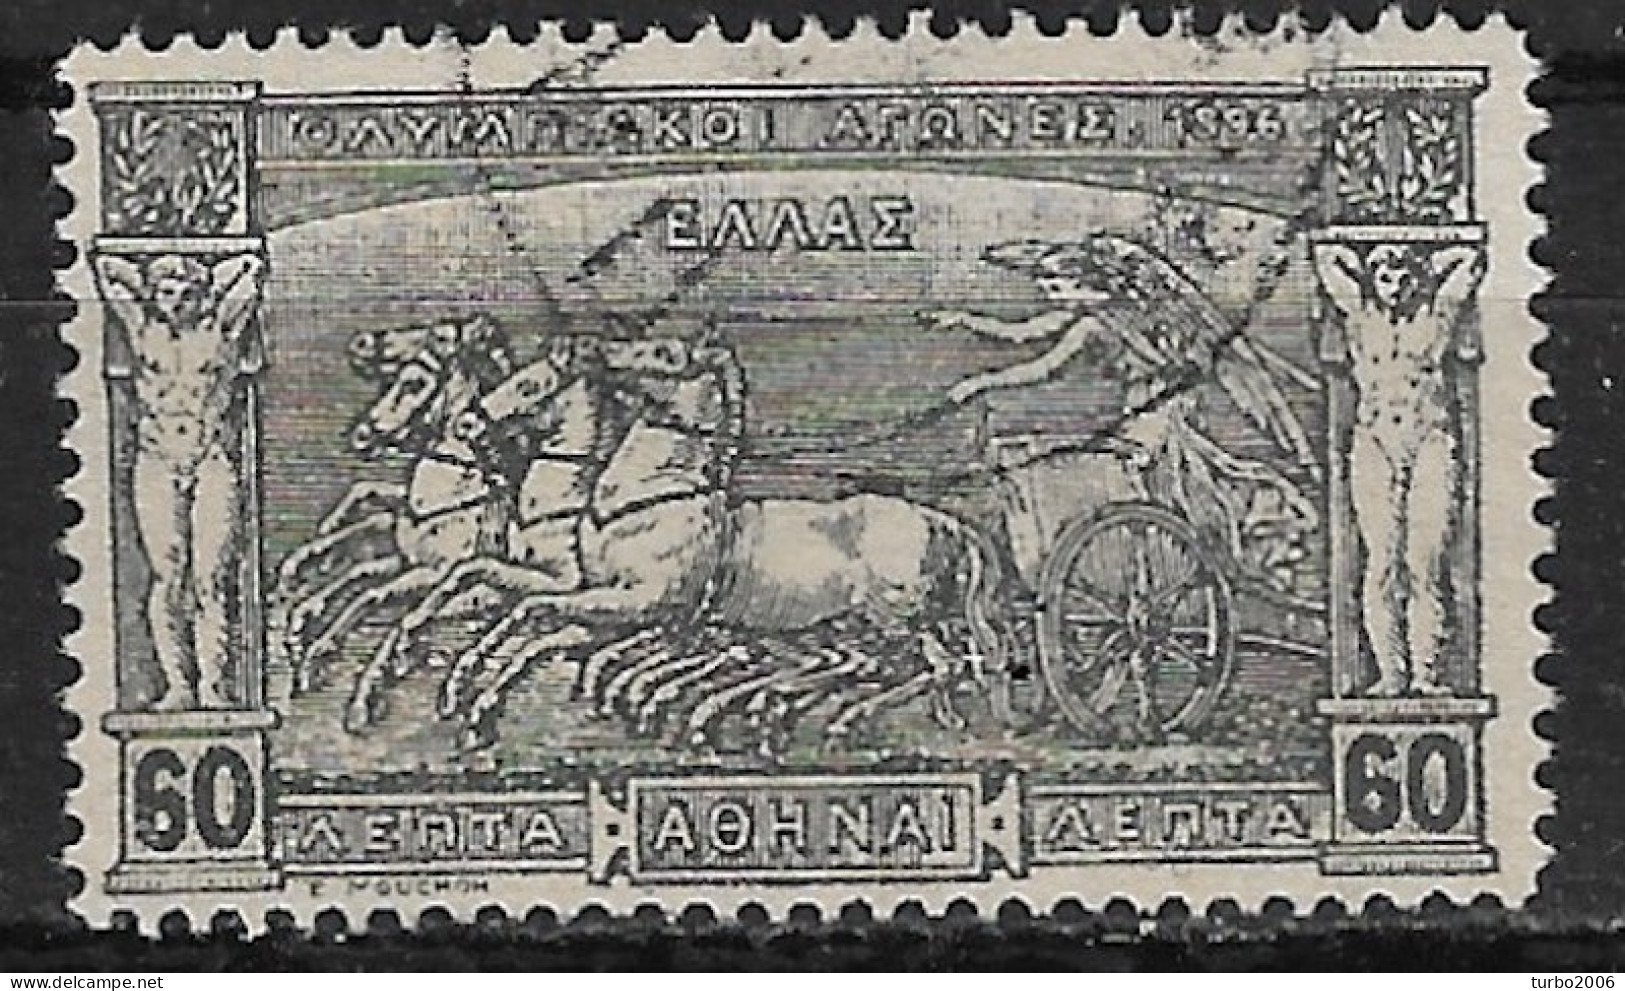 GREECE 1896 First Olympic Games 60 Lepta Black Vl. 140 Interesting Classic Forgery With Fake Cancellation ΠΑΤΡΑΙ - Used Stamps